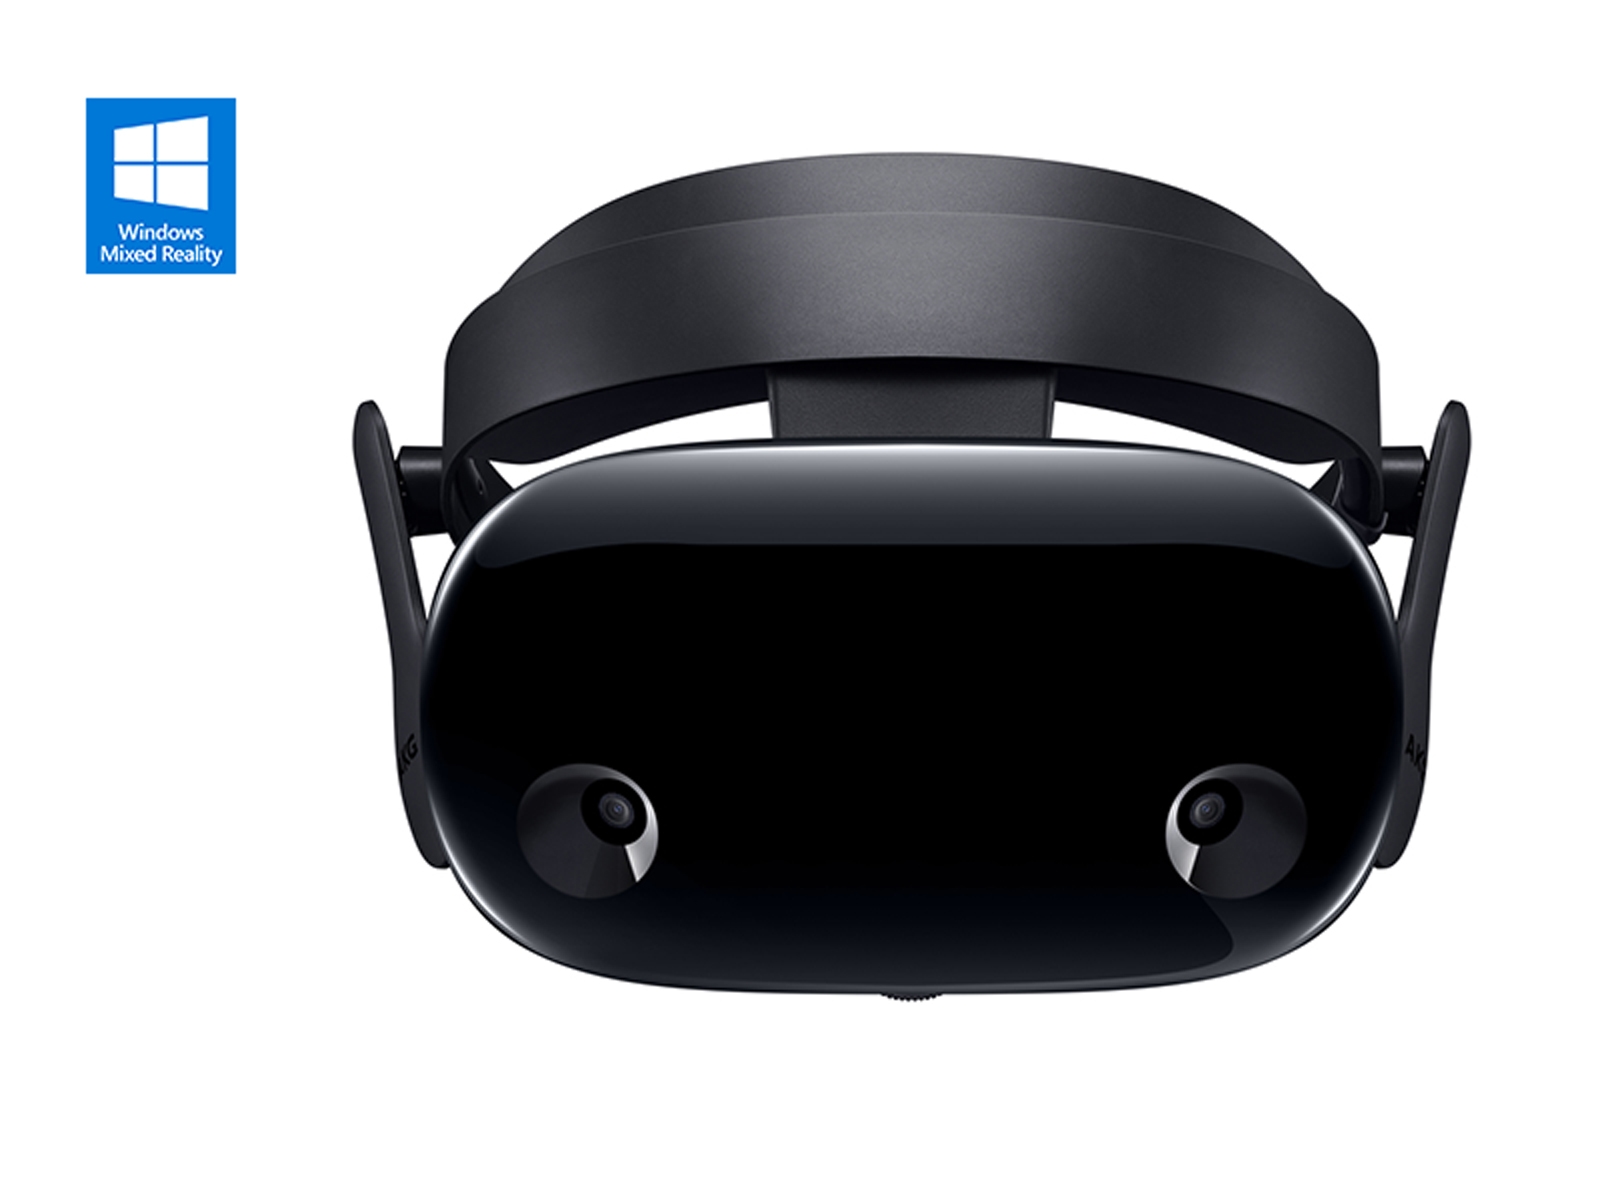 Hmd Odyssey+ (Mixed Reality), Hmd Support | Samsung Care US